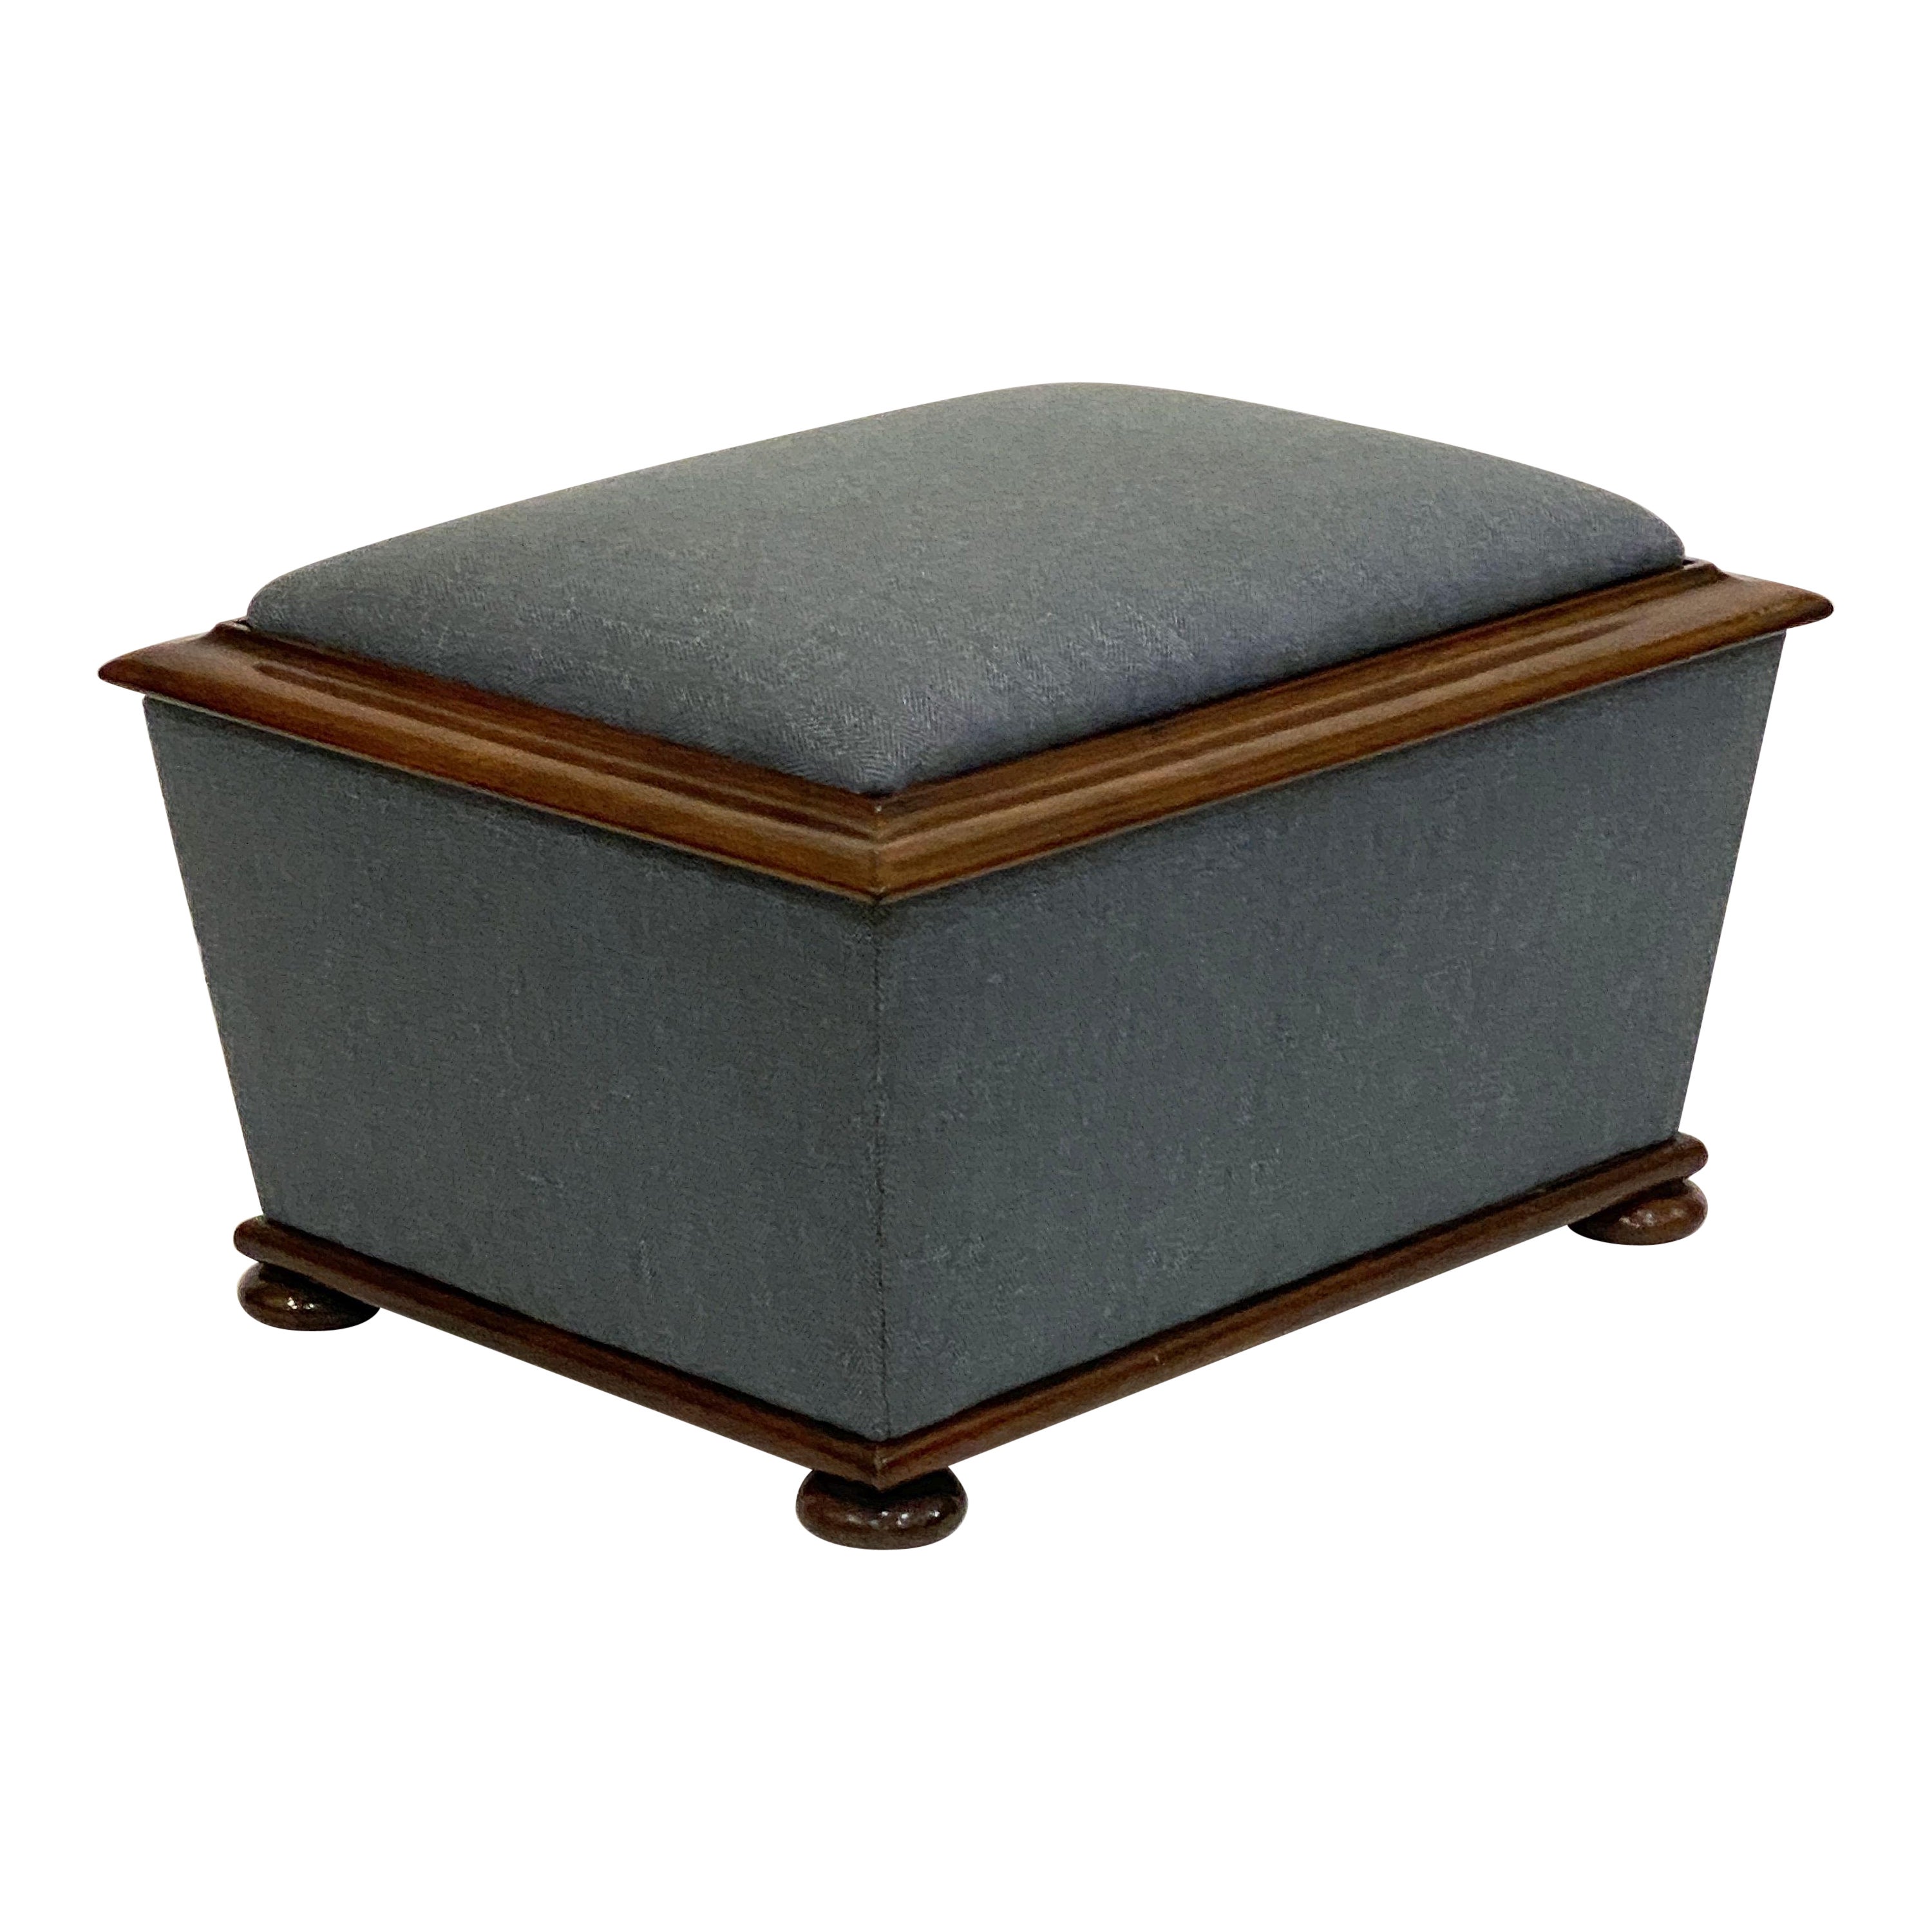 English Upholstered Trunk or Pouffe Ottoman Seat